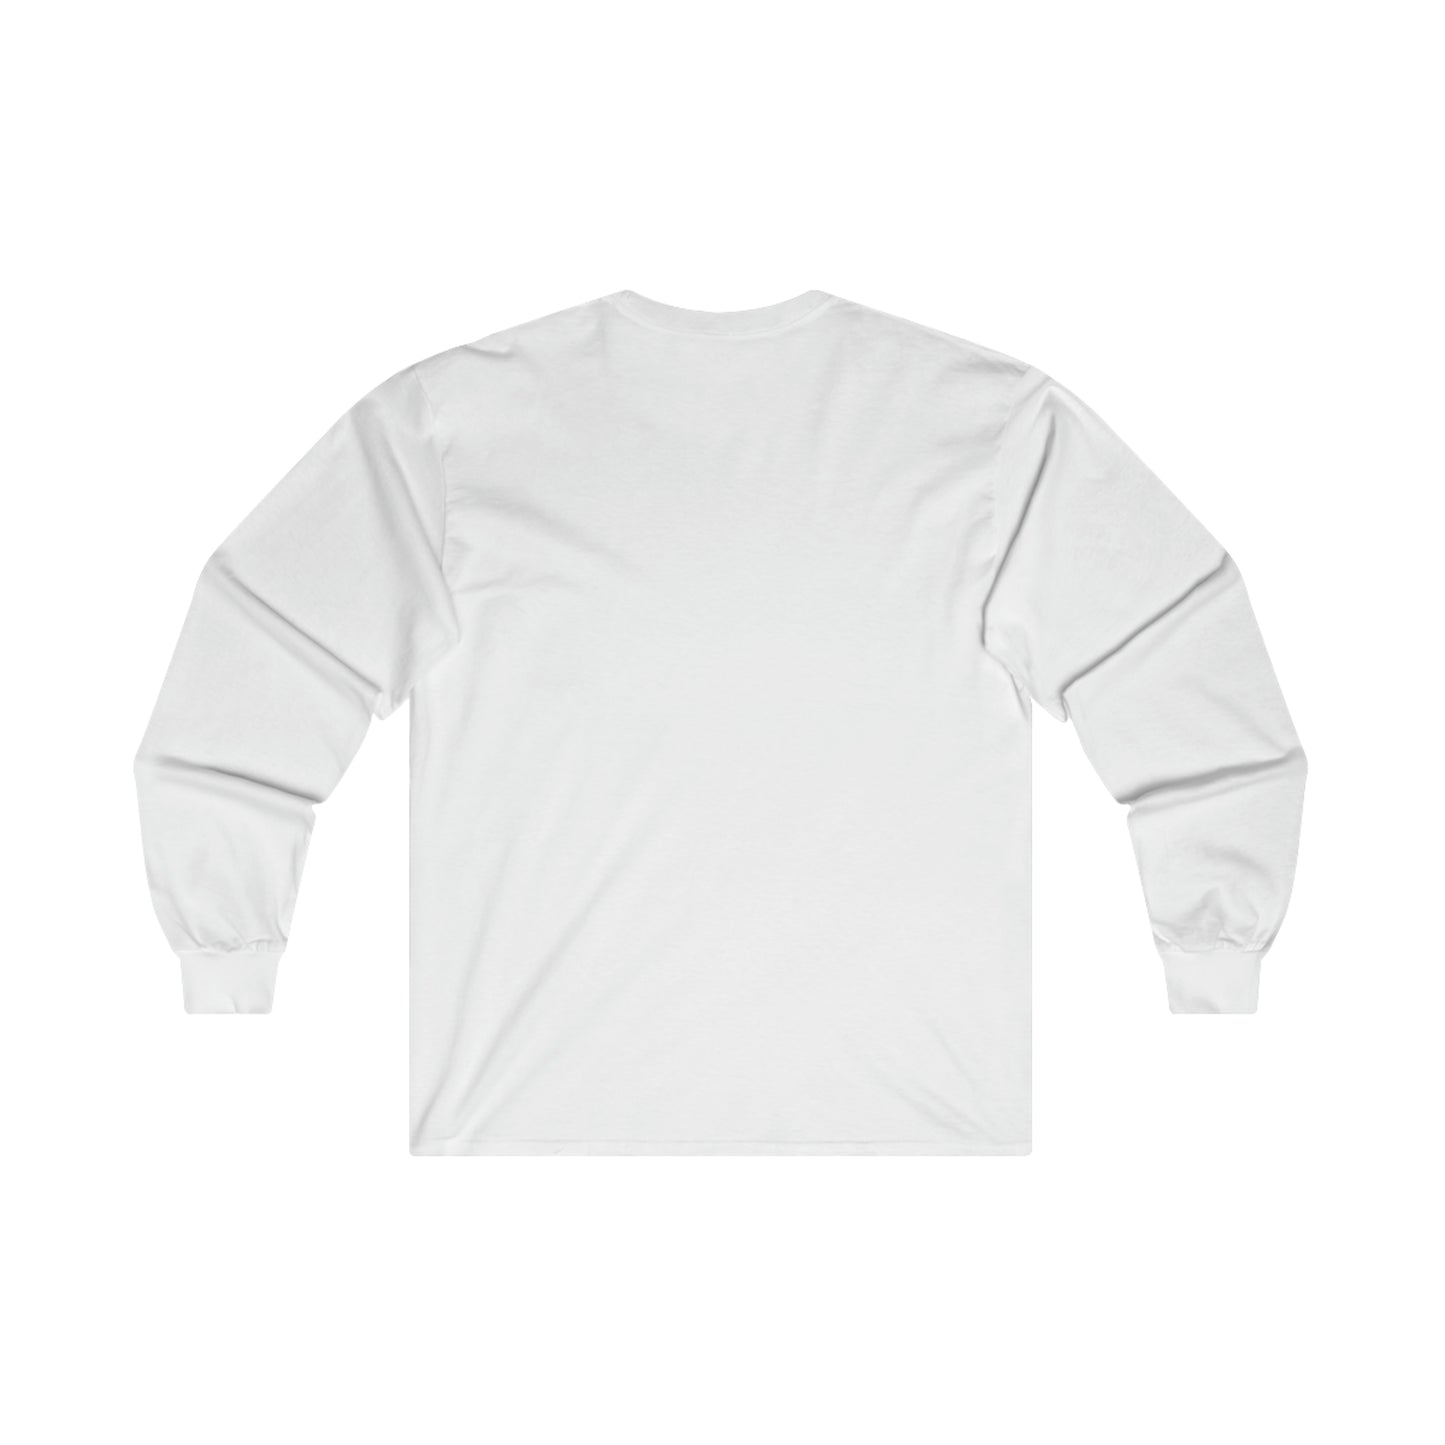 Oh Good its Free Self Checkout - Ultra Cotton Long Sleeve Tee